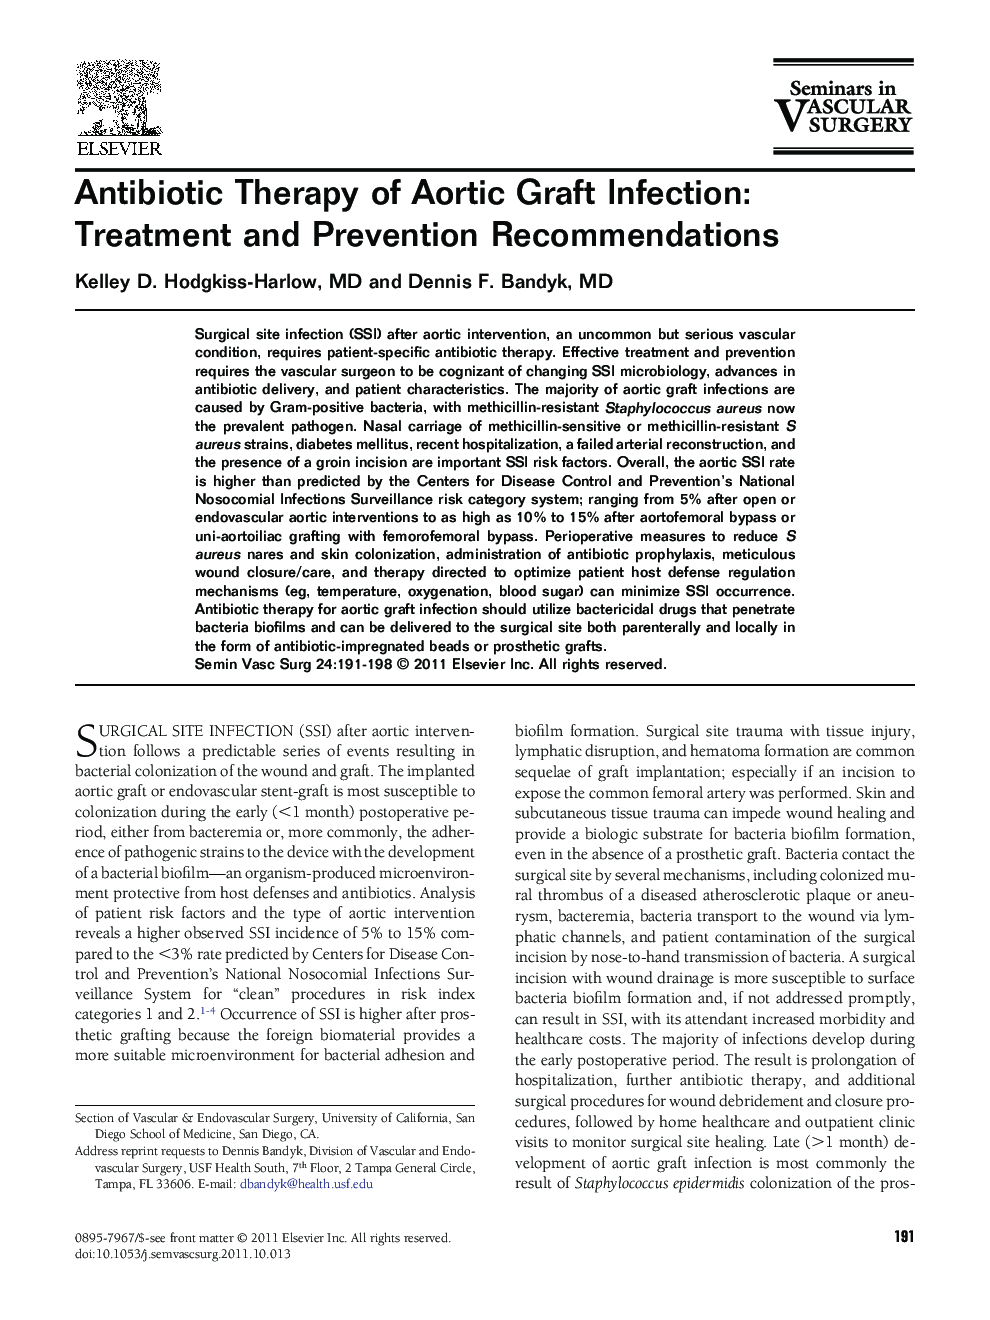 Antibiotic Therapy of Aortic Graft Infection: Treatment and Prevention Recommendations